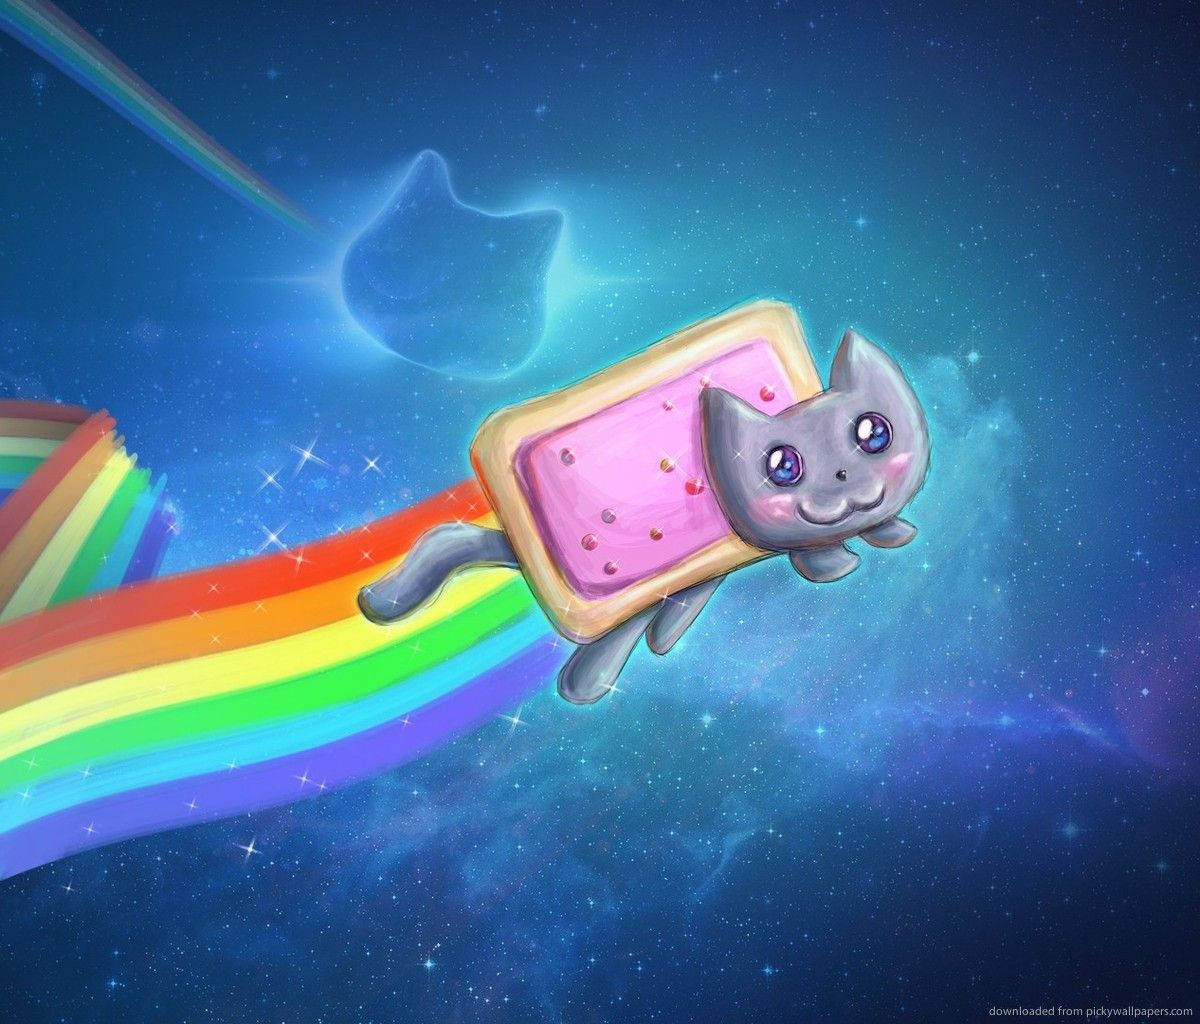 Look cool and cuddly with a Nyan Cat Fan Art Wallpaper! Wallpaper